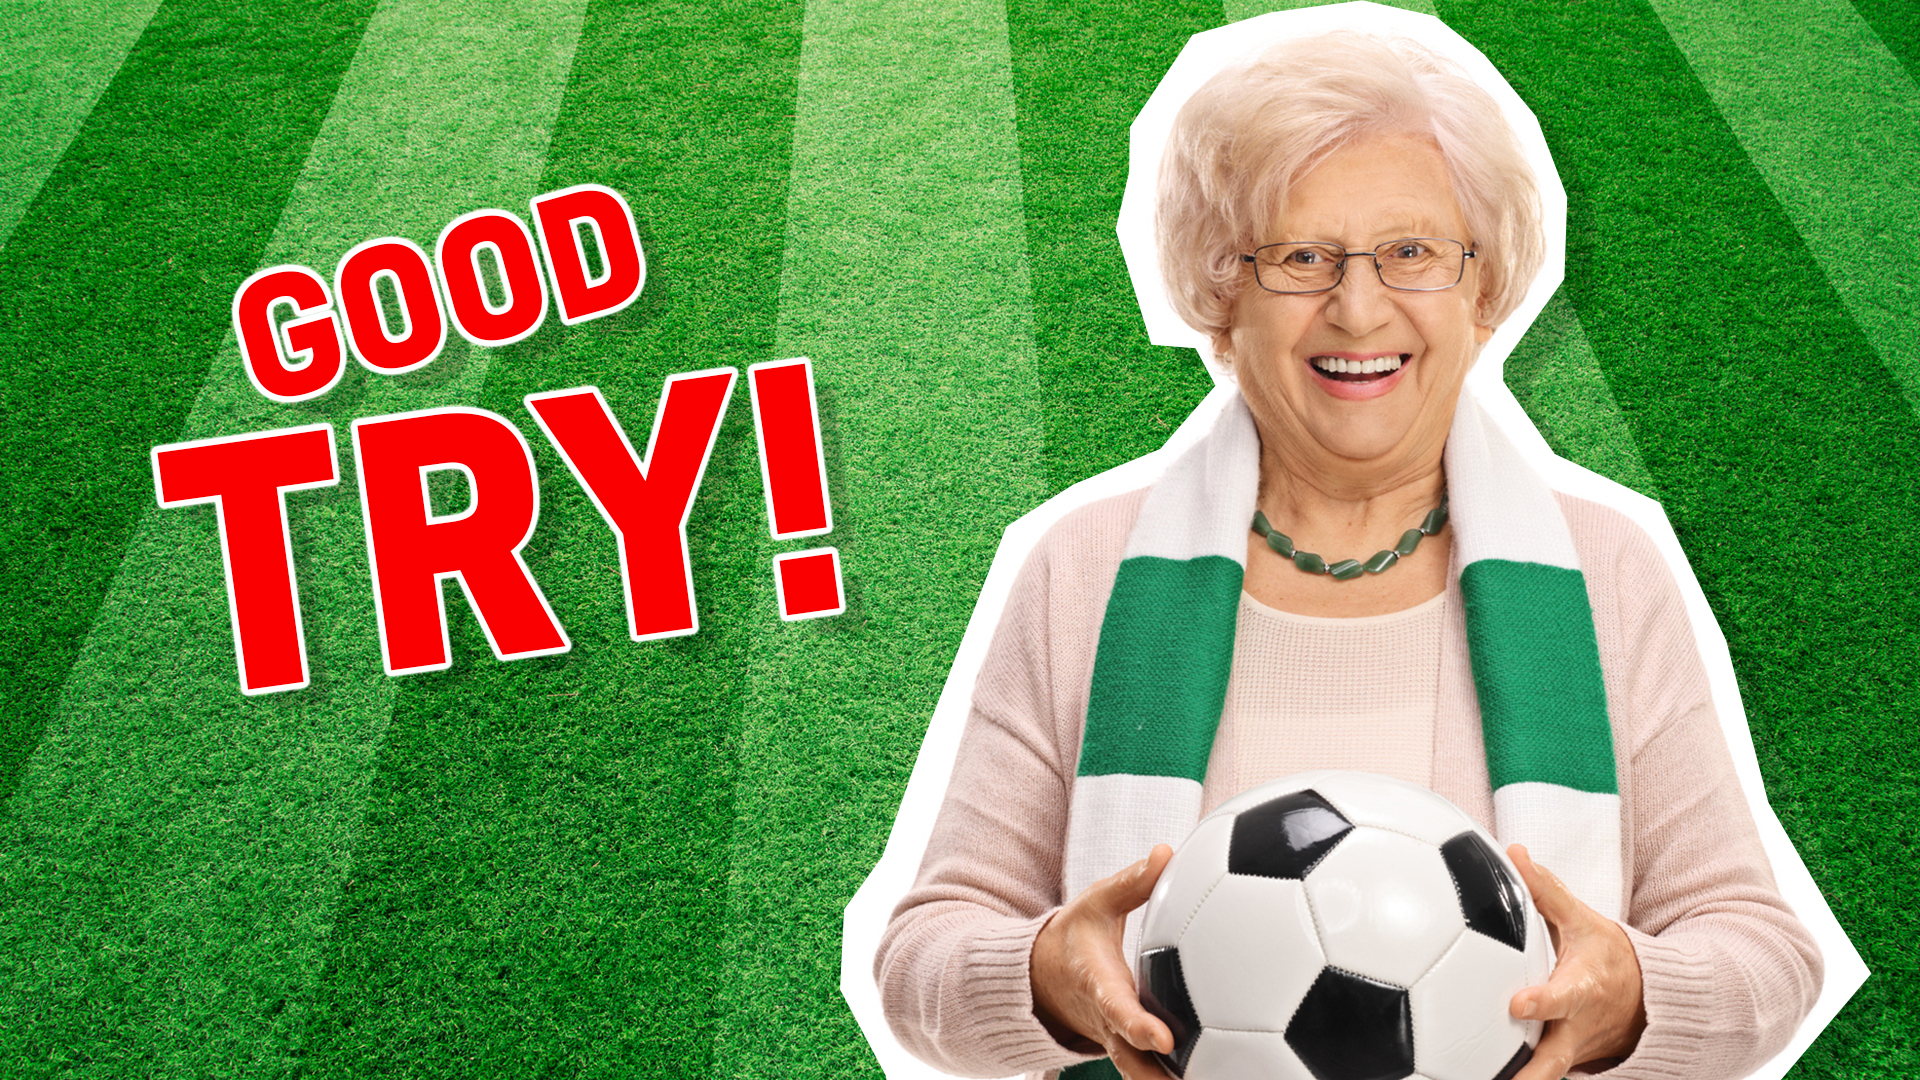 An elderly lady holding a football and smiling